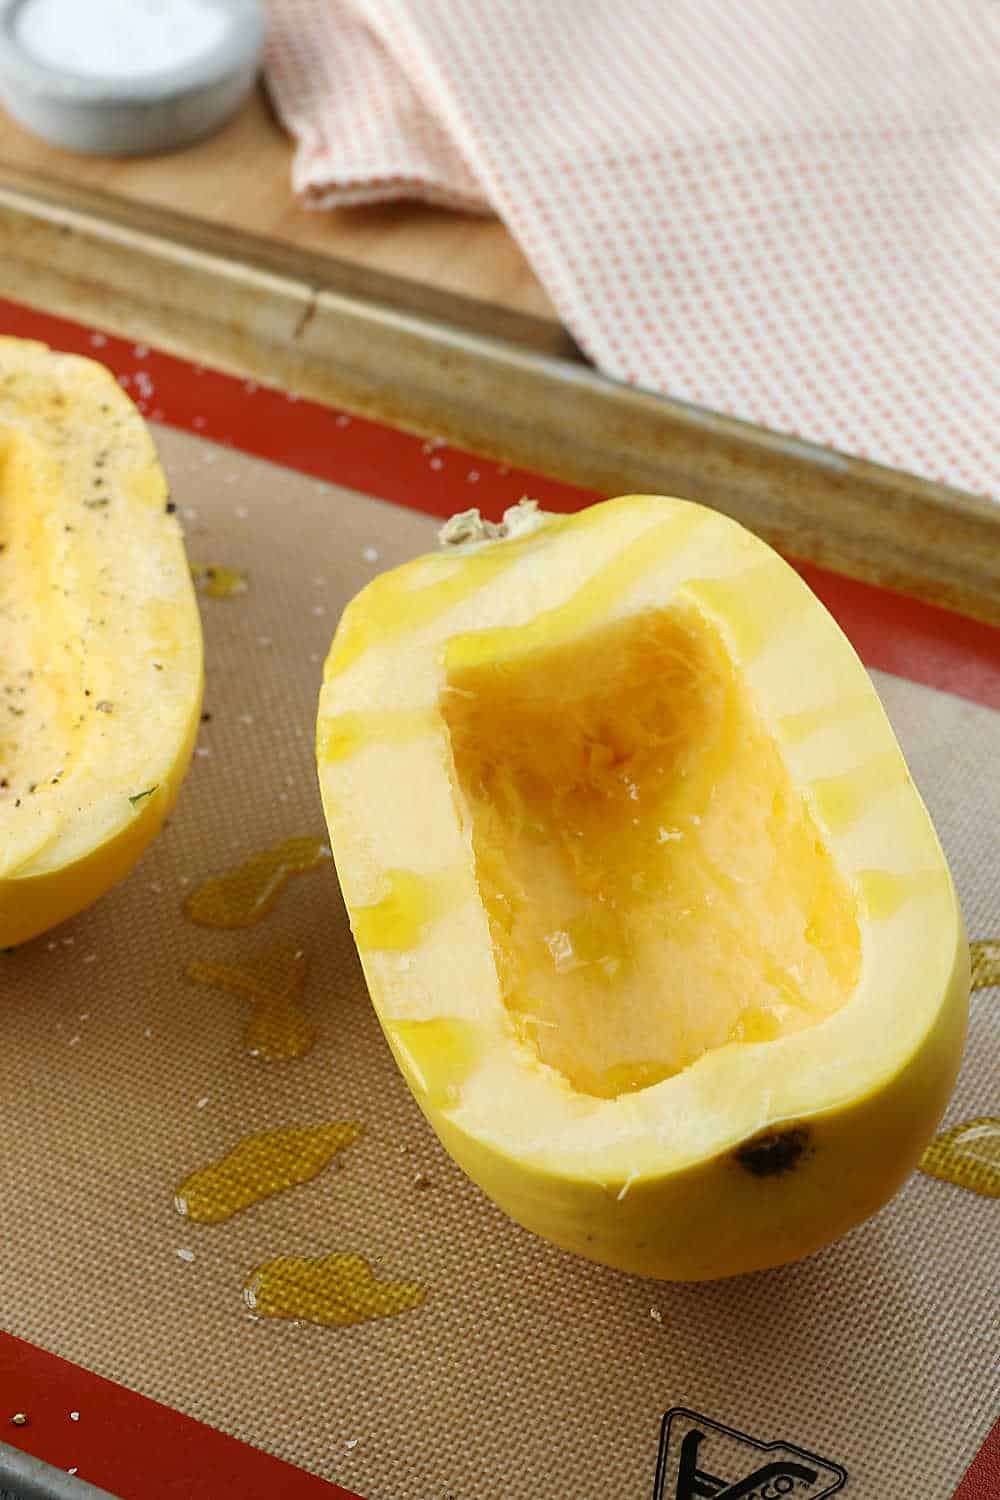 Seasoning the baked spaghetti squash is the next step when learning how to cook spaghetti squash in the oven. 